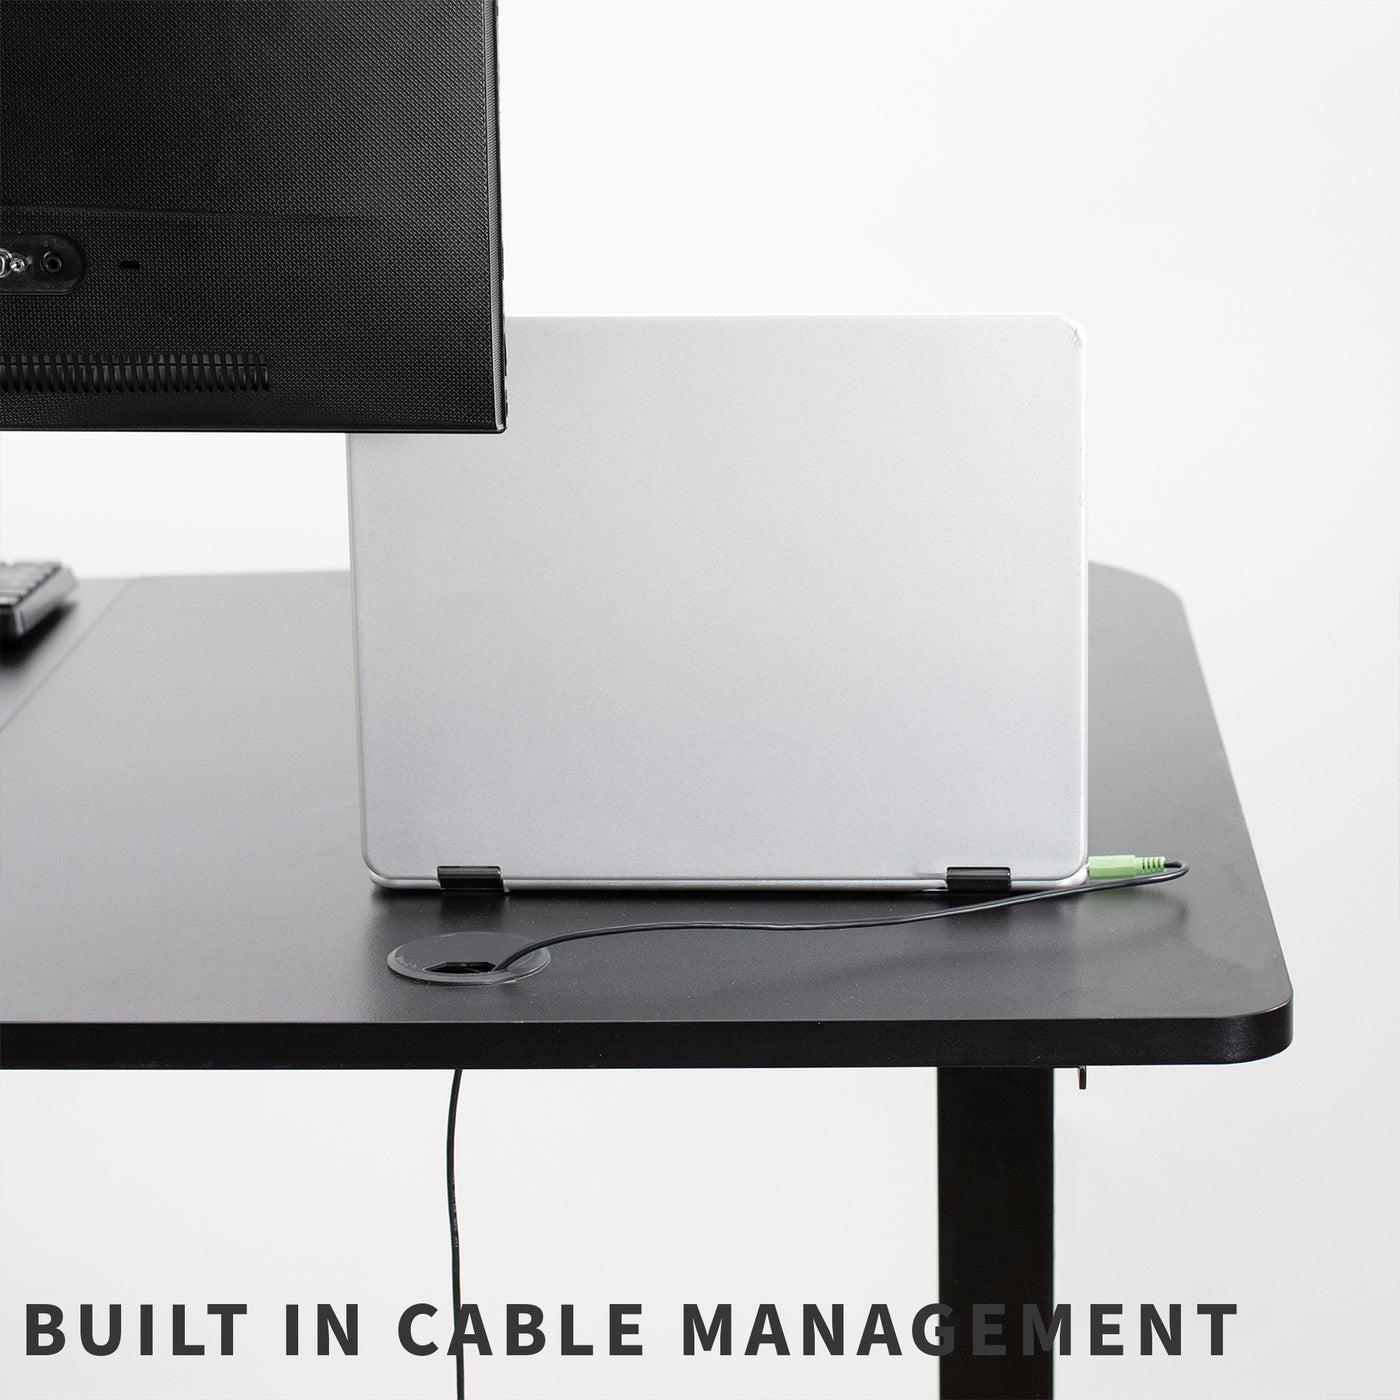 Sturdy manual hand crank height adjustable desk for sit or stand workstation with built-in cable management.